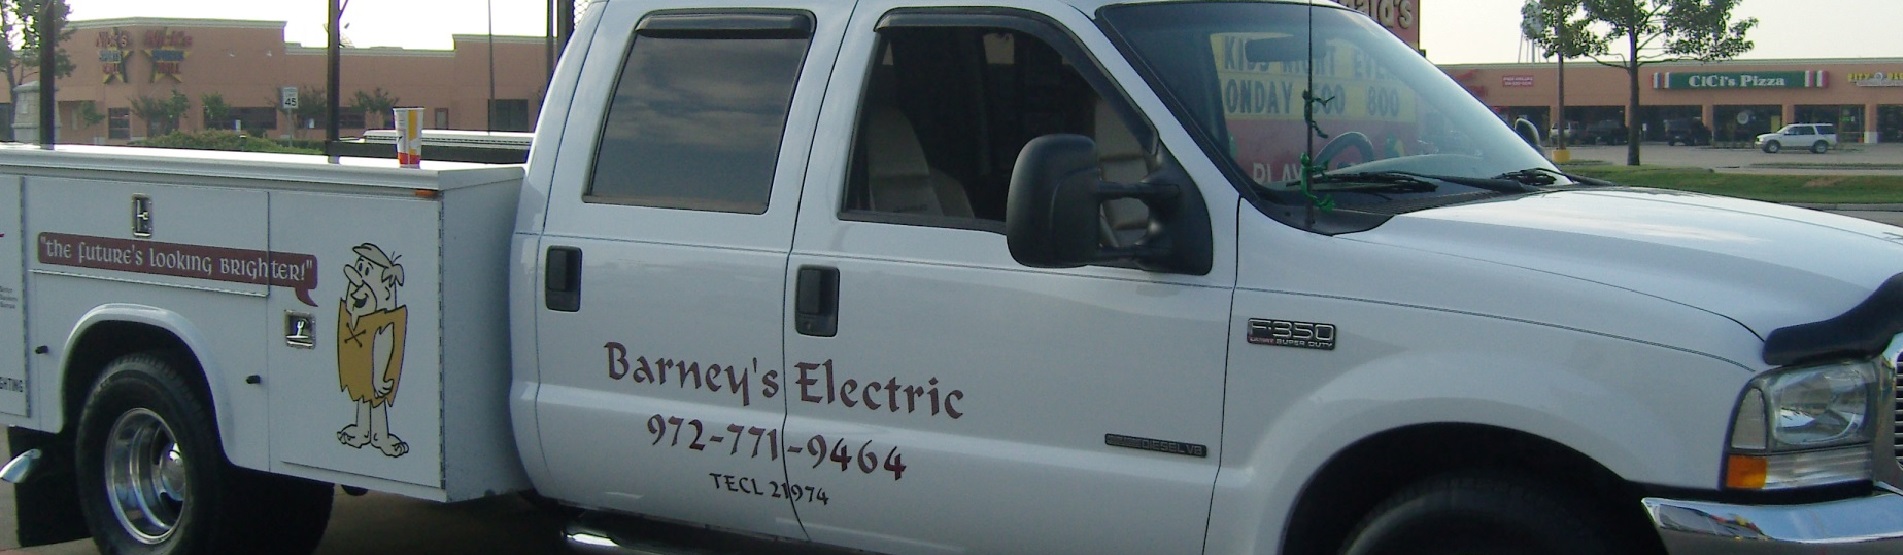 Residential Electrician Electrician Rockwall TX Barney's Electric Full Service Electrician Residential Commercial Retail and New Construction Wiring Repair Installation Service 24 Hour Emergency Services Master Electrician Rockwall Texas